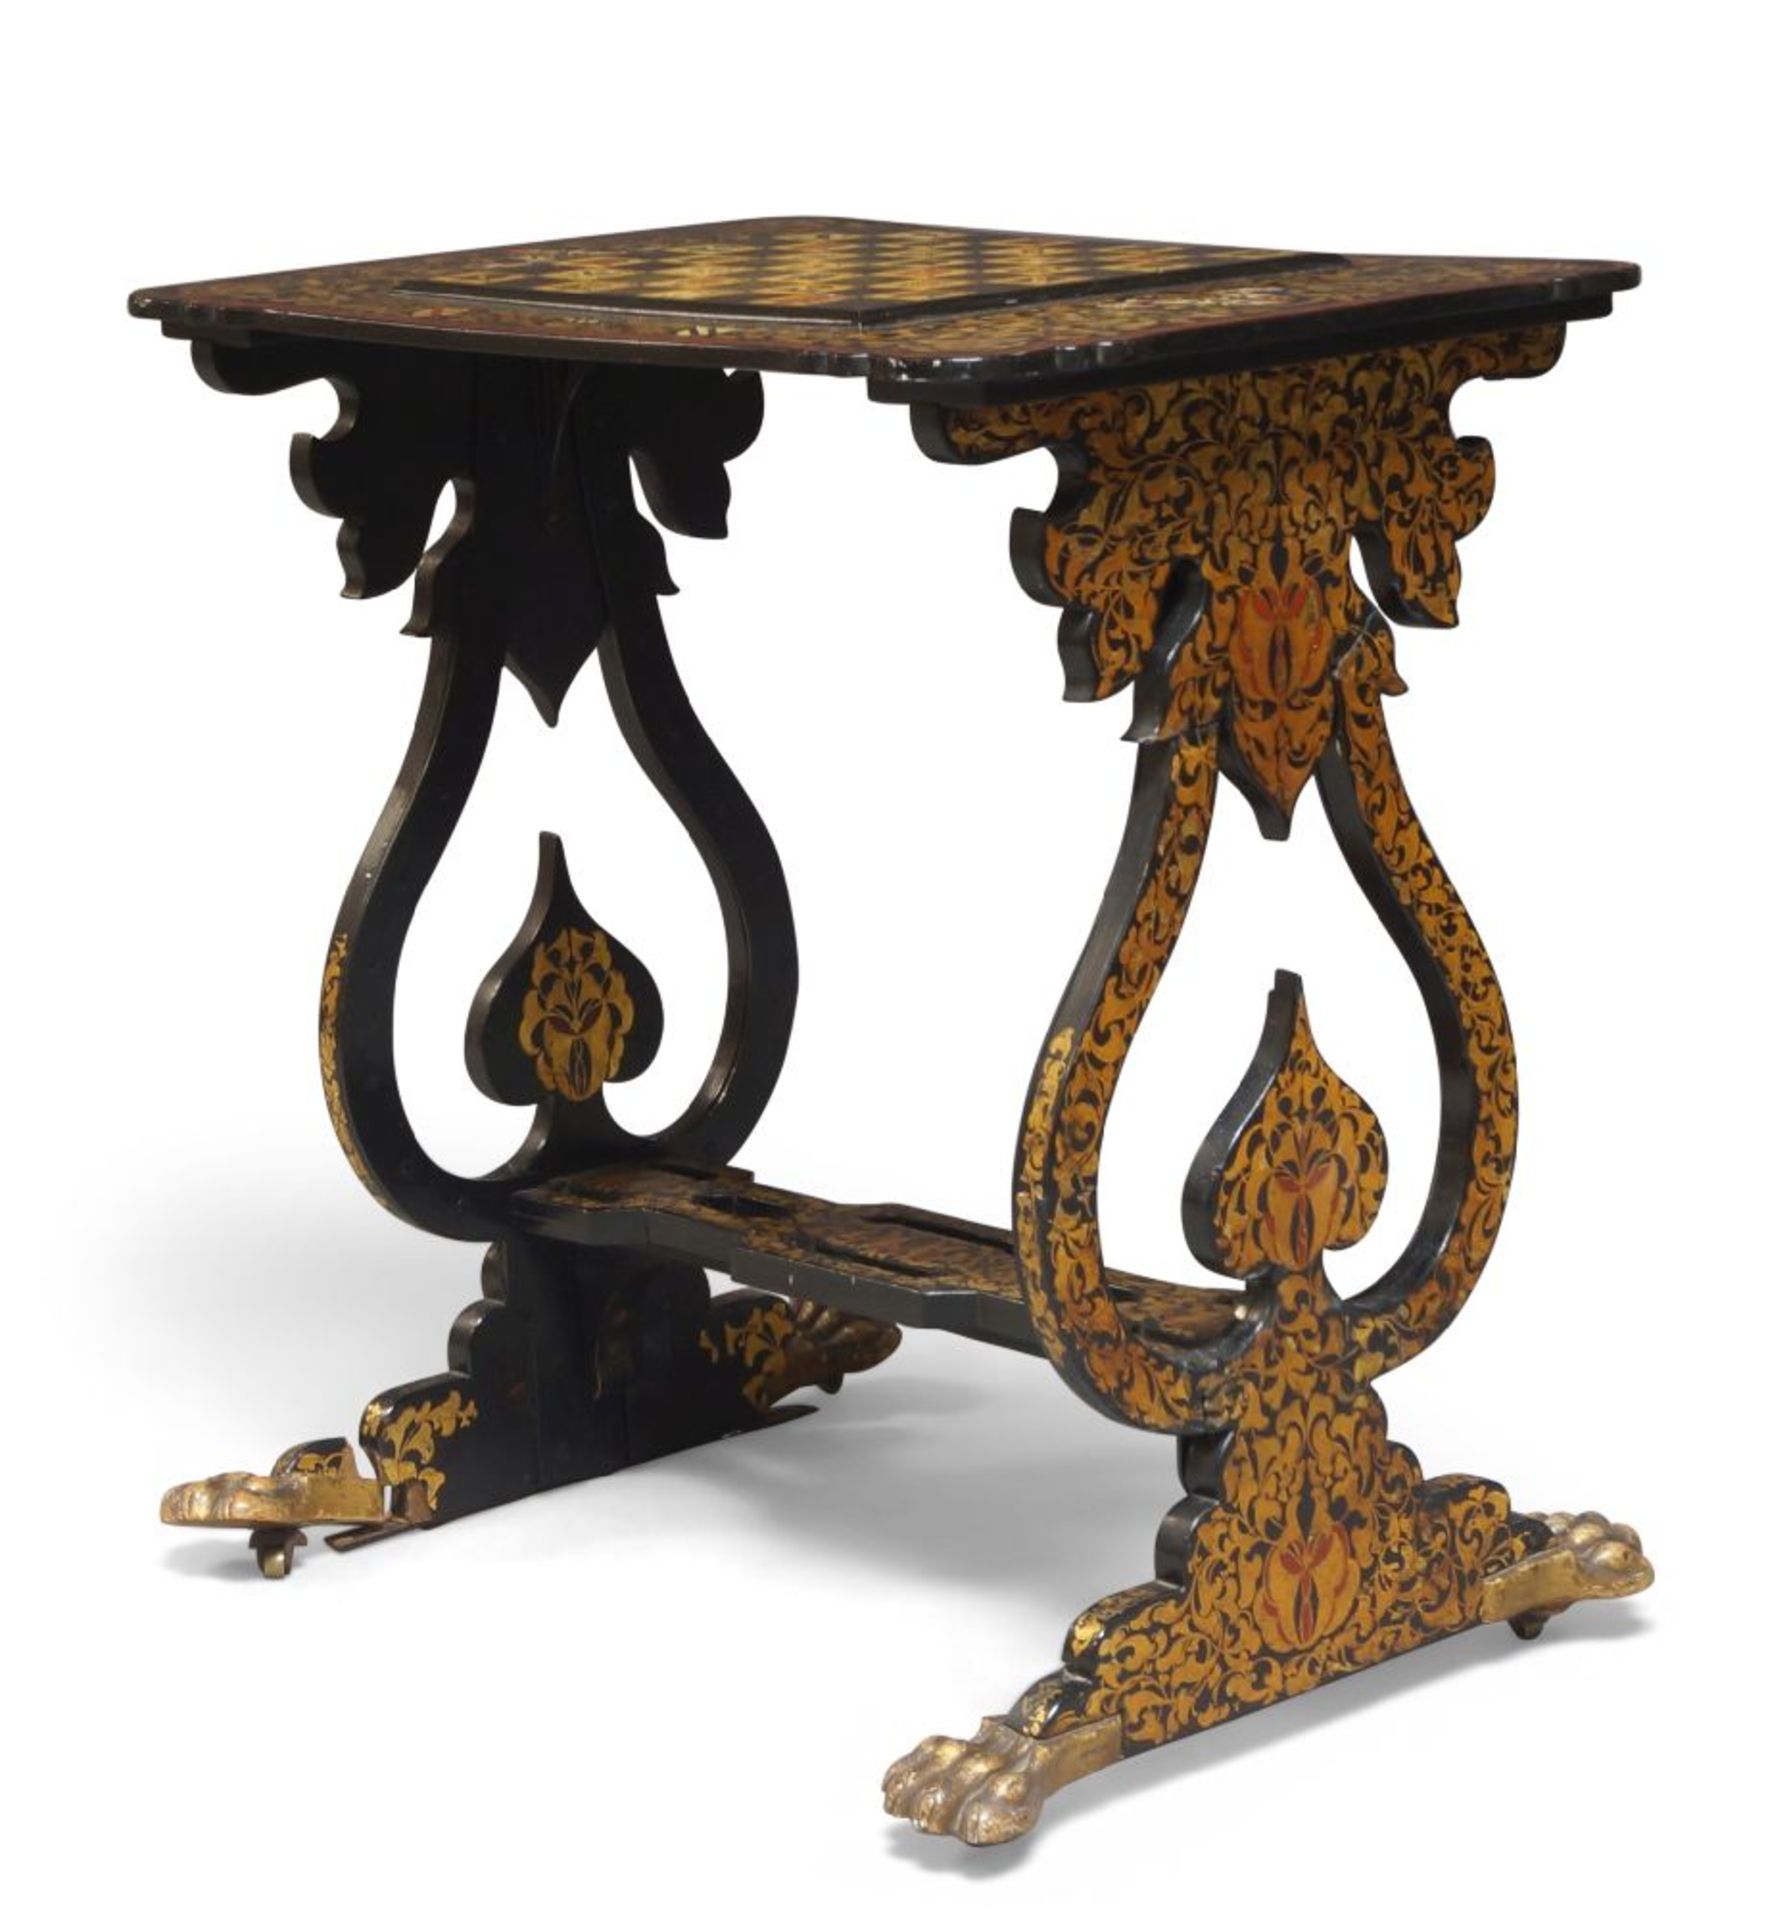 A Victorian black lacquered and gilded chess table, c.1880, the chequered top surrounded by